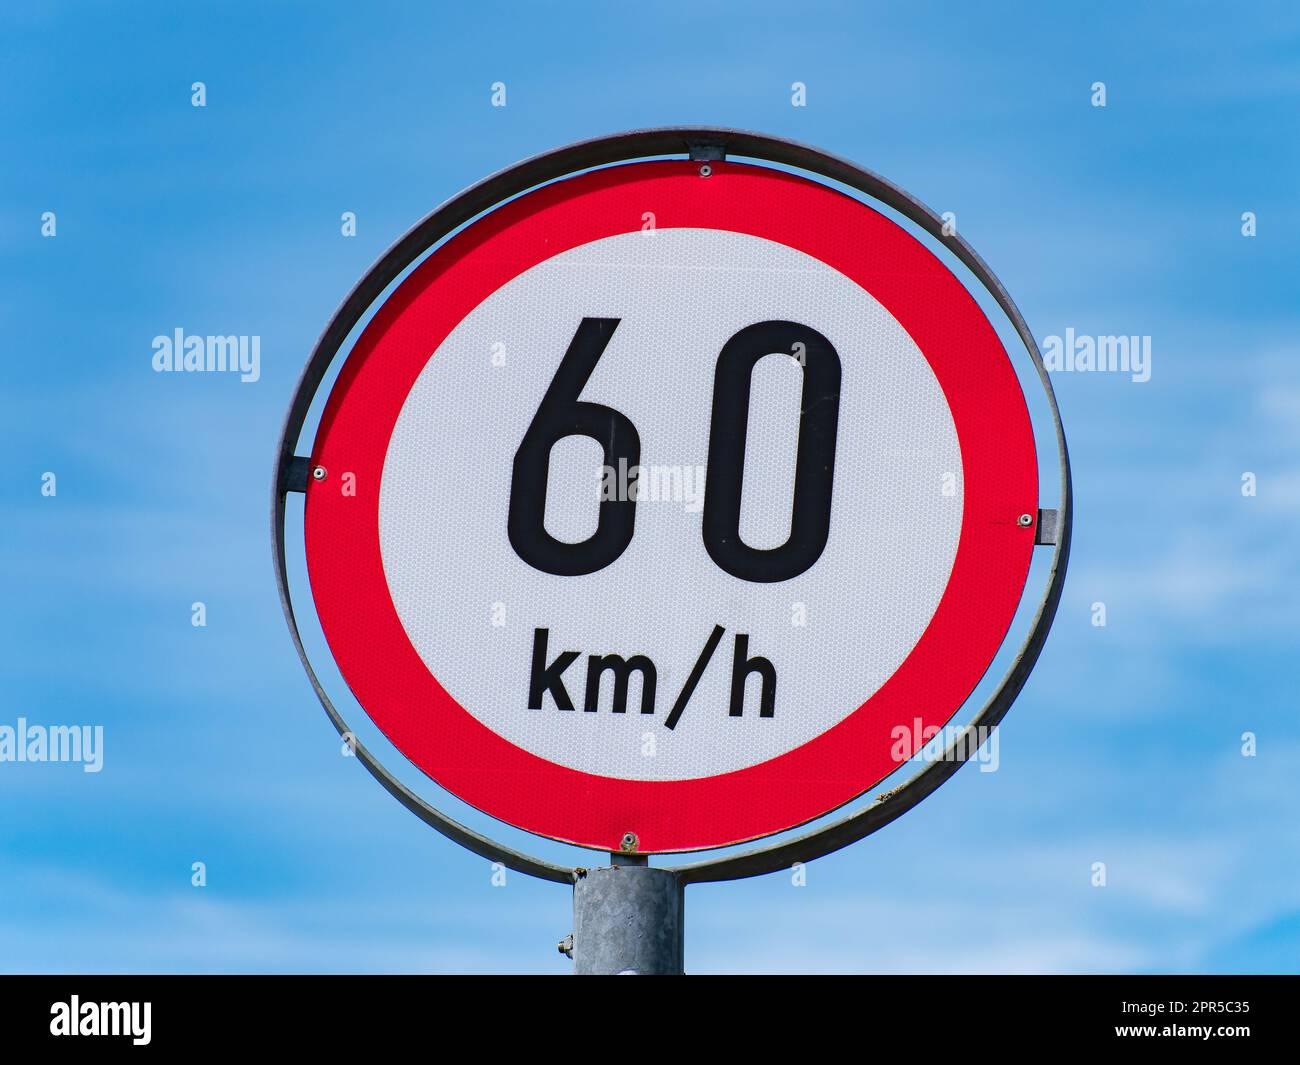 A road sign limiting the speed to 60 km h on a sky background. Stock Photo